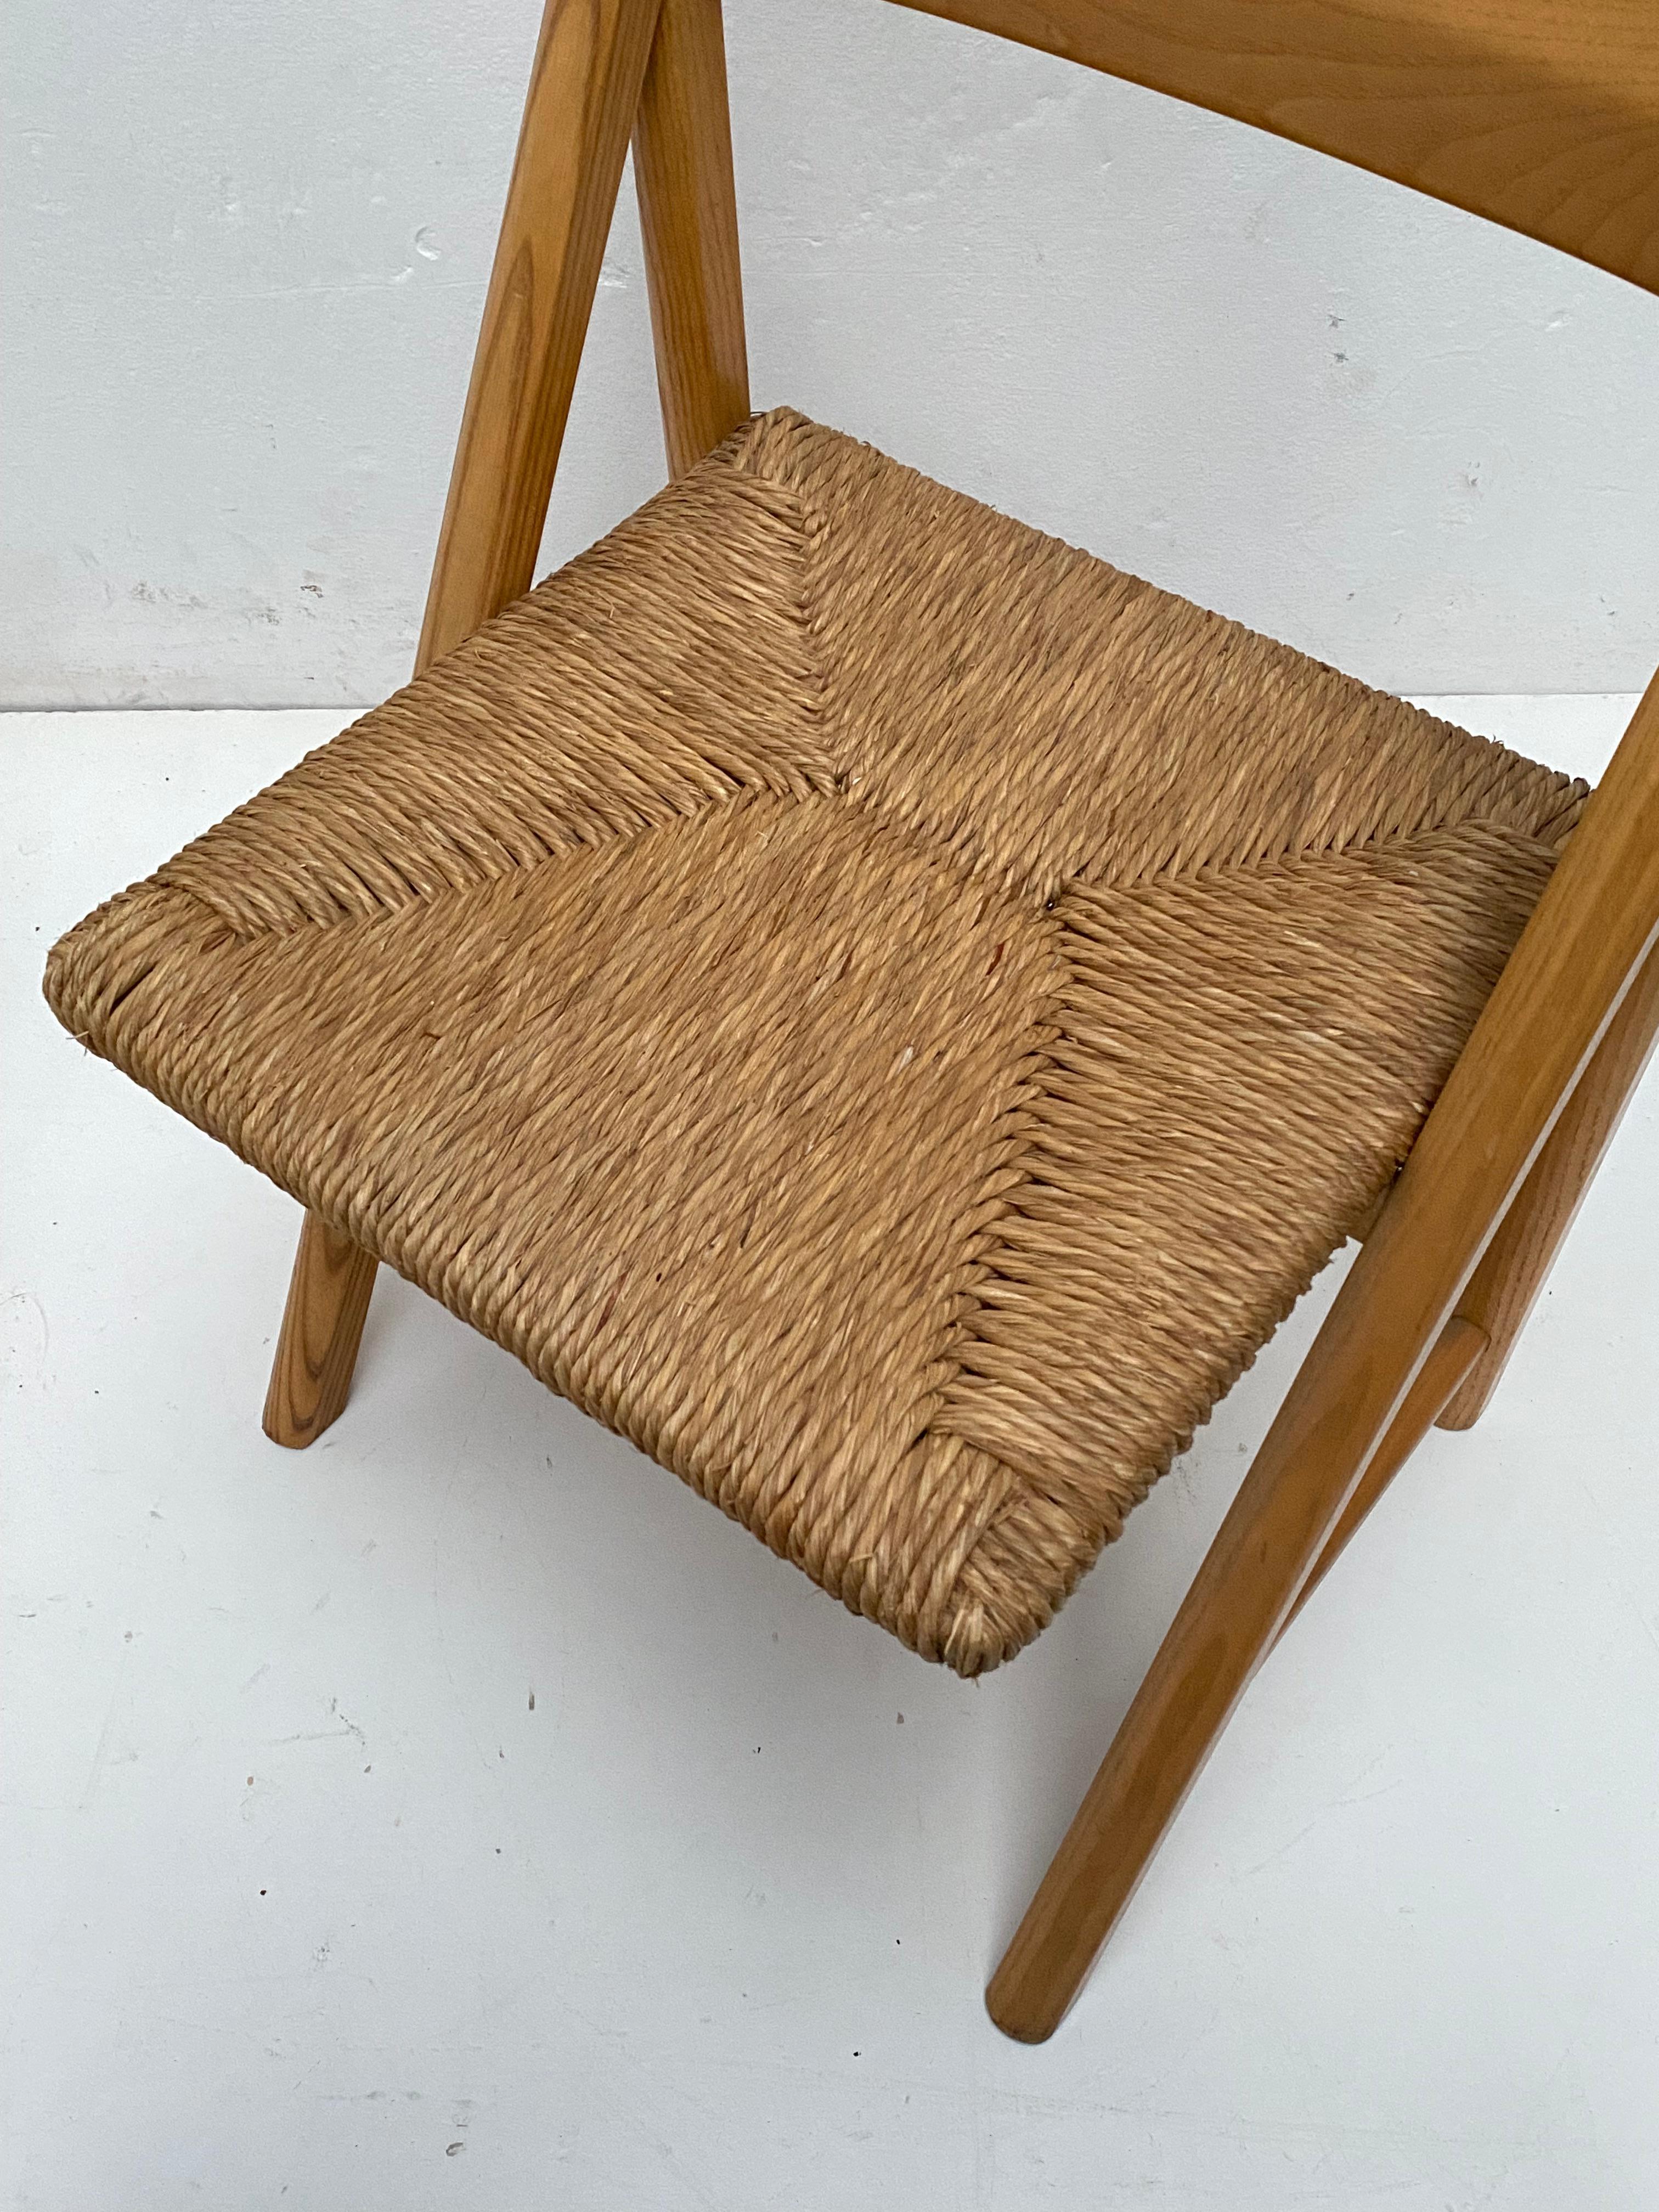 Pair of Beautiful Carved Ashwood & Woven Seagrass Seats 1970's Italy Switzerland For Sale 1